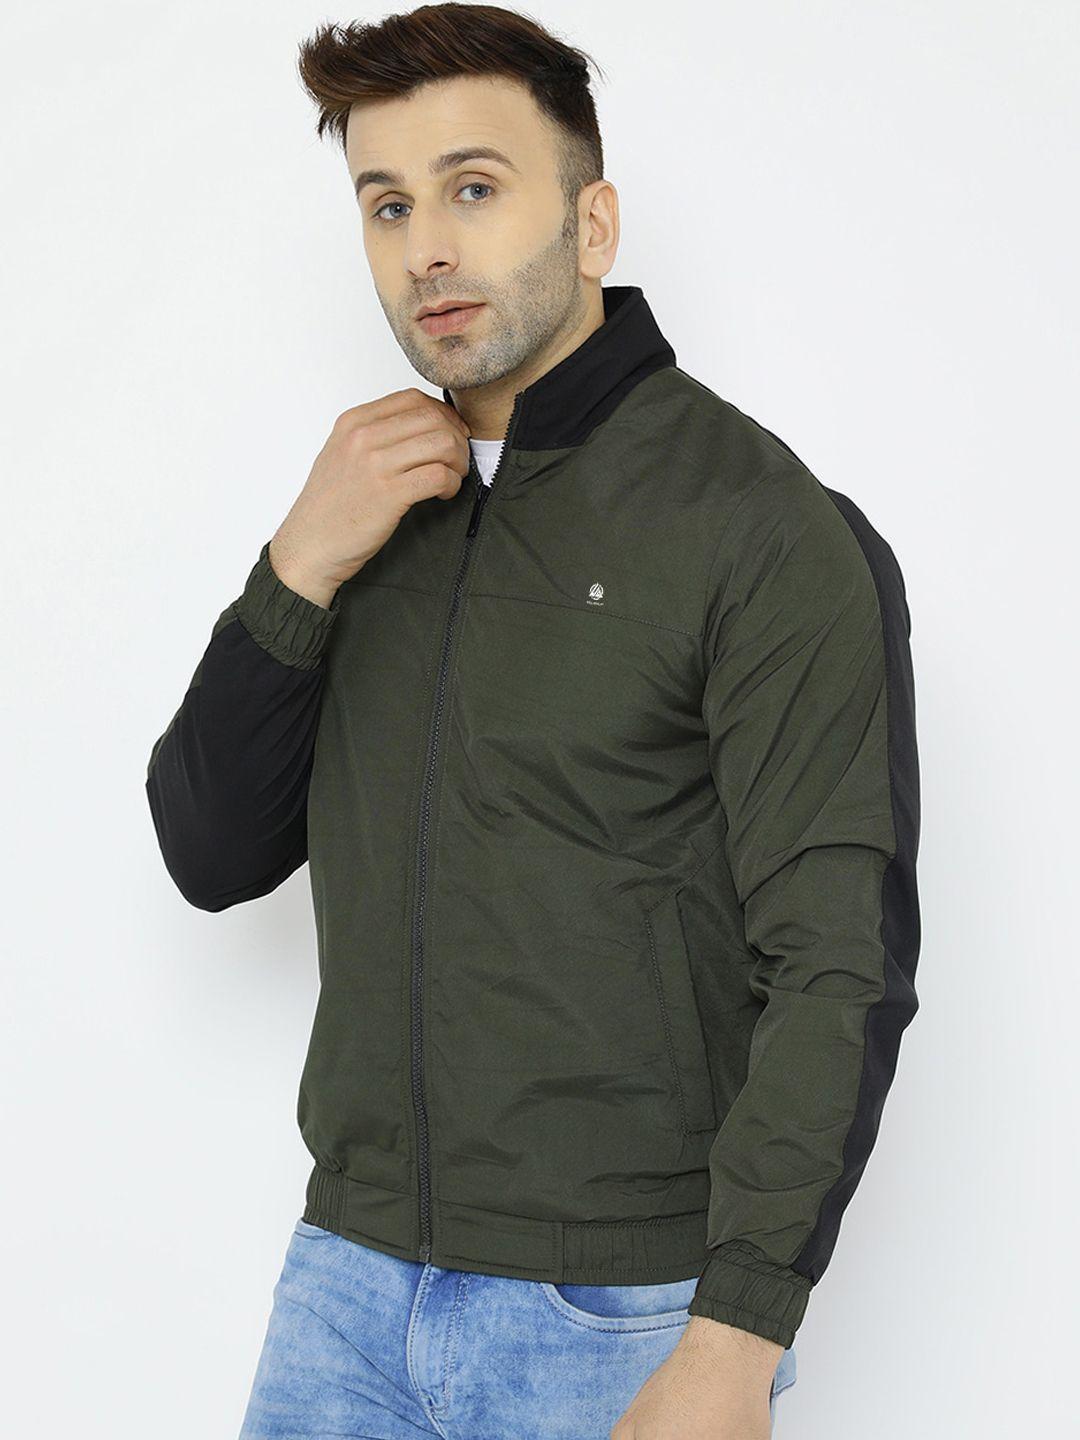 well quality colourblocked lightweight dri-fit sporty jacket